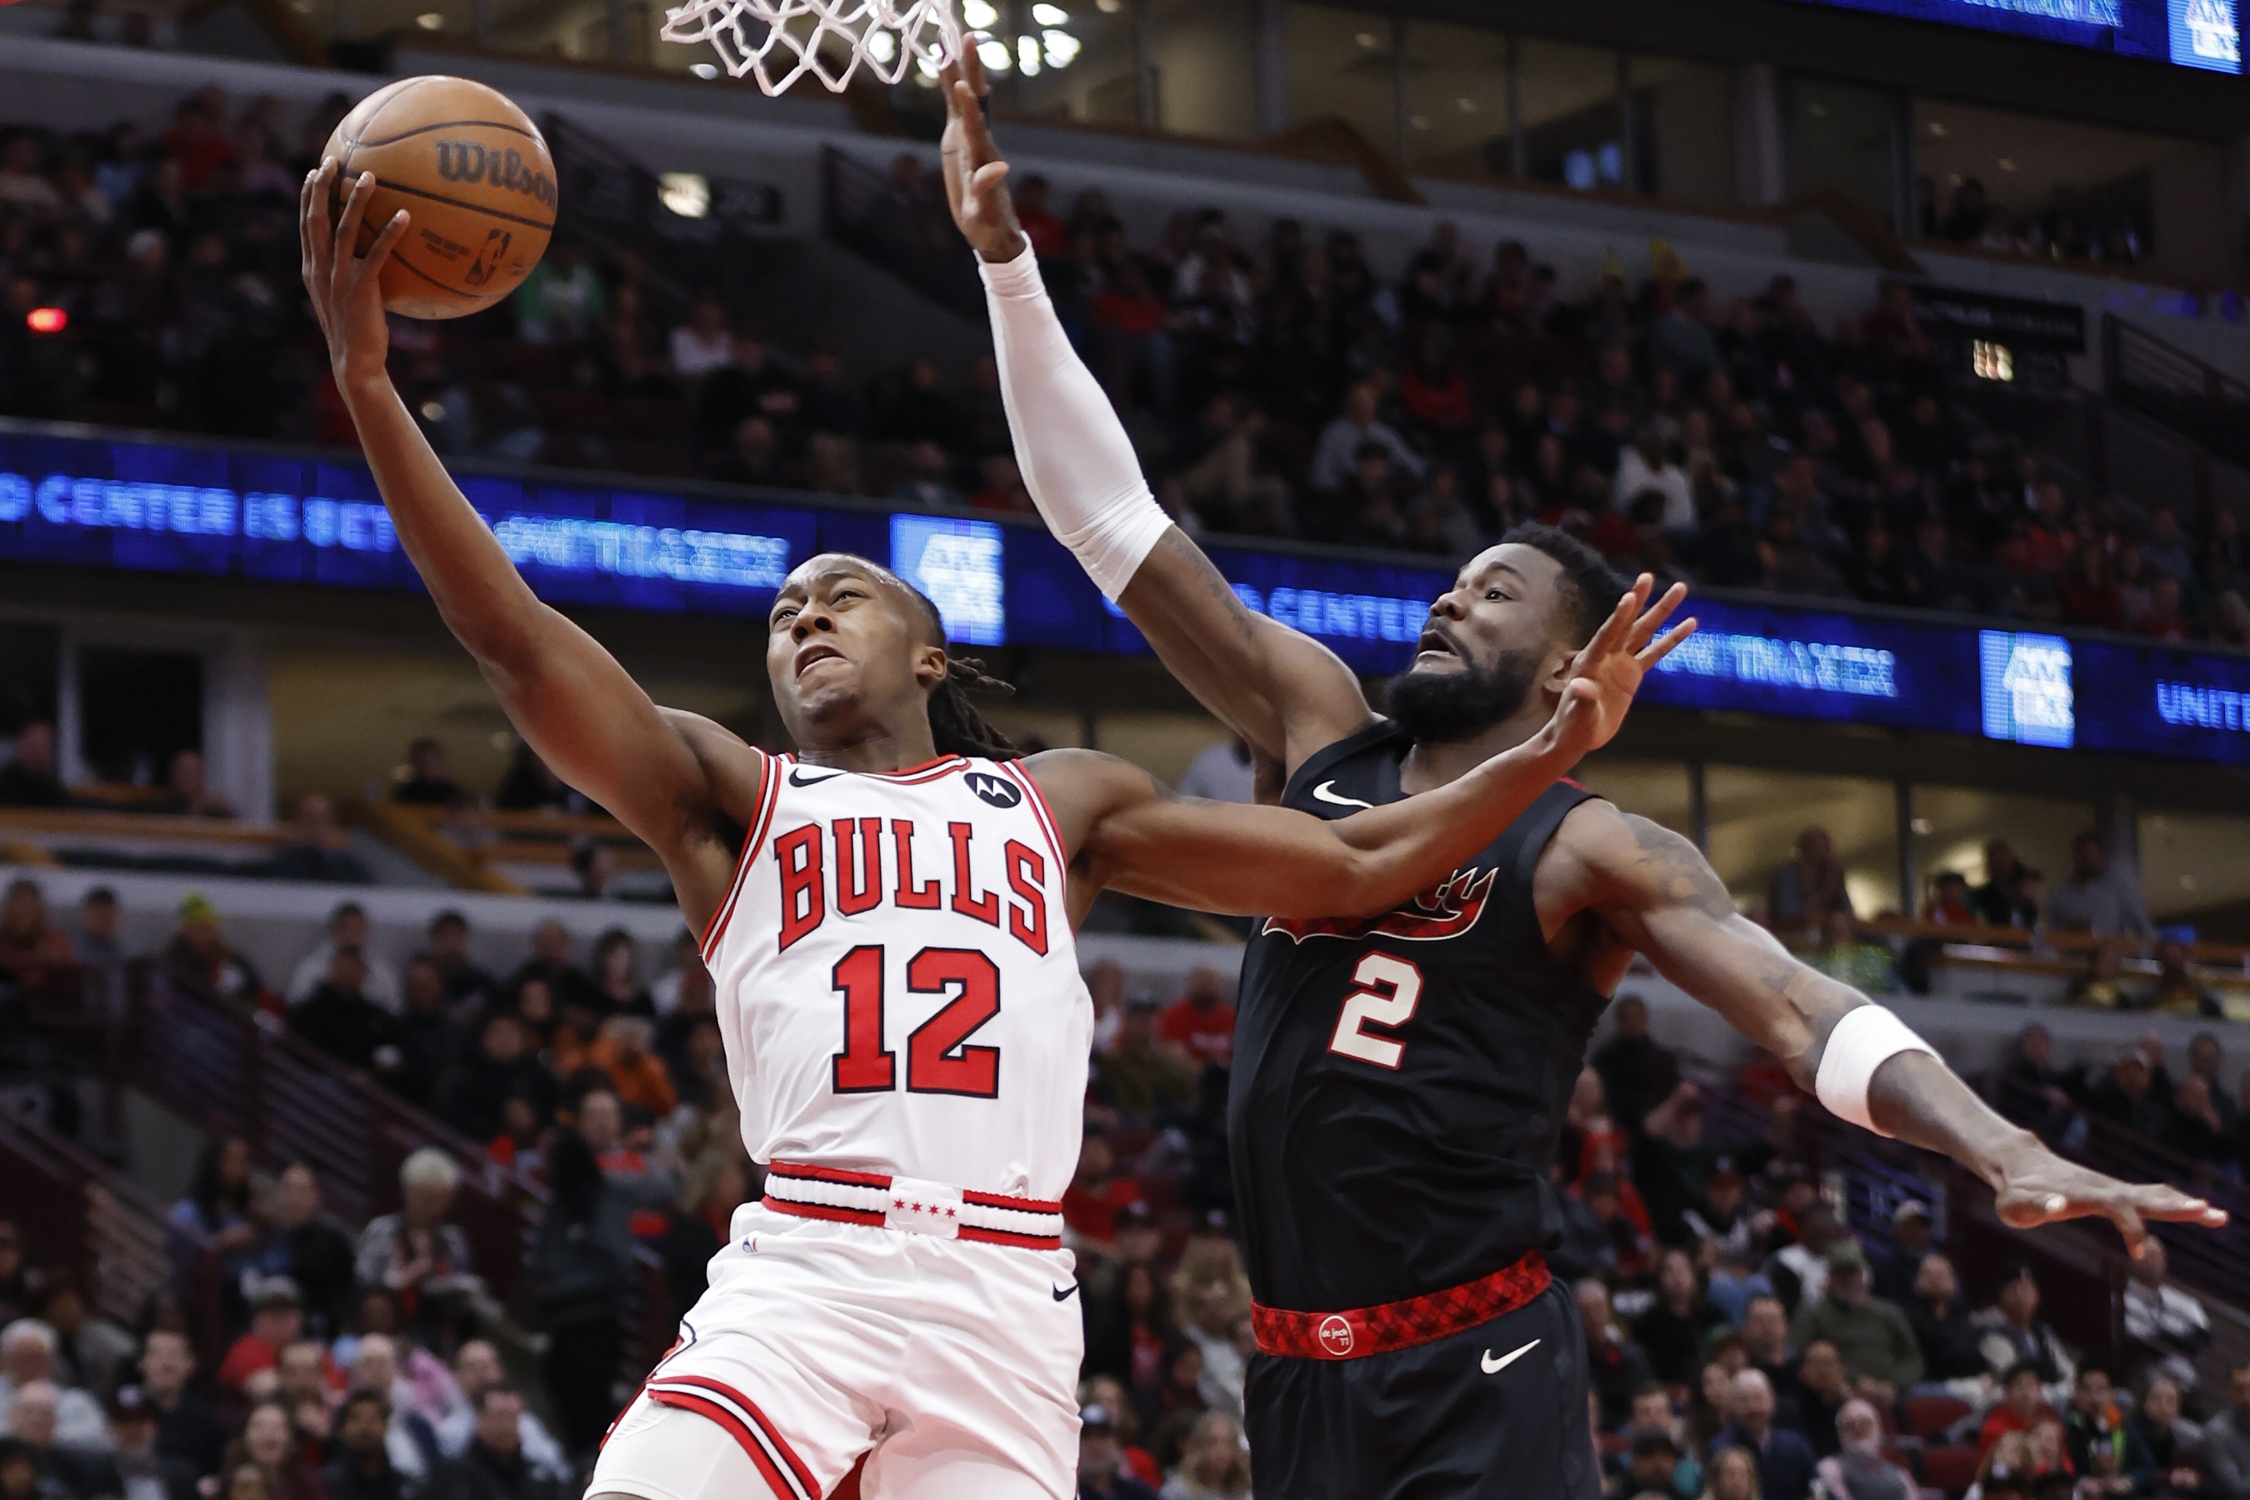 Chicago Bulls guard Ayo Dosunmu (12) goes to the basket against Portland Trail Blazers center Deandre Ayton (2) during the first half at United Center.